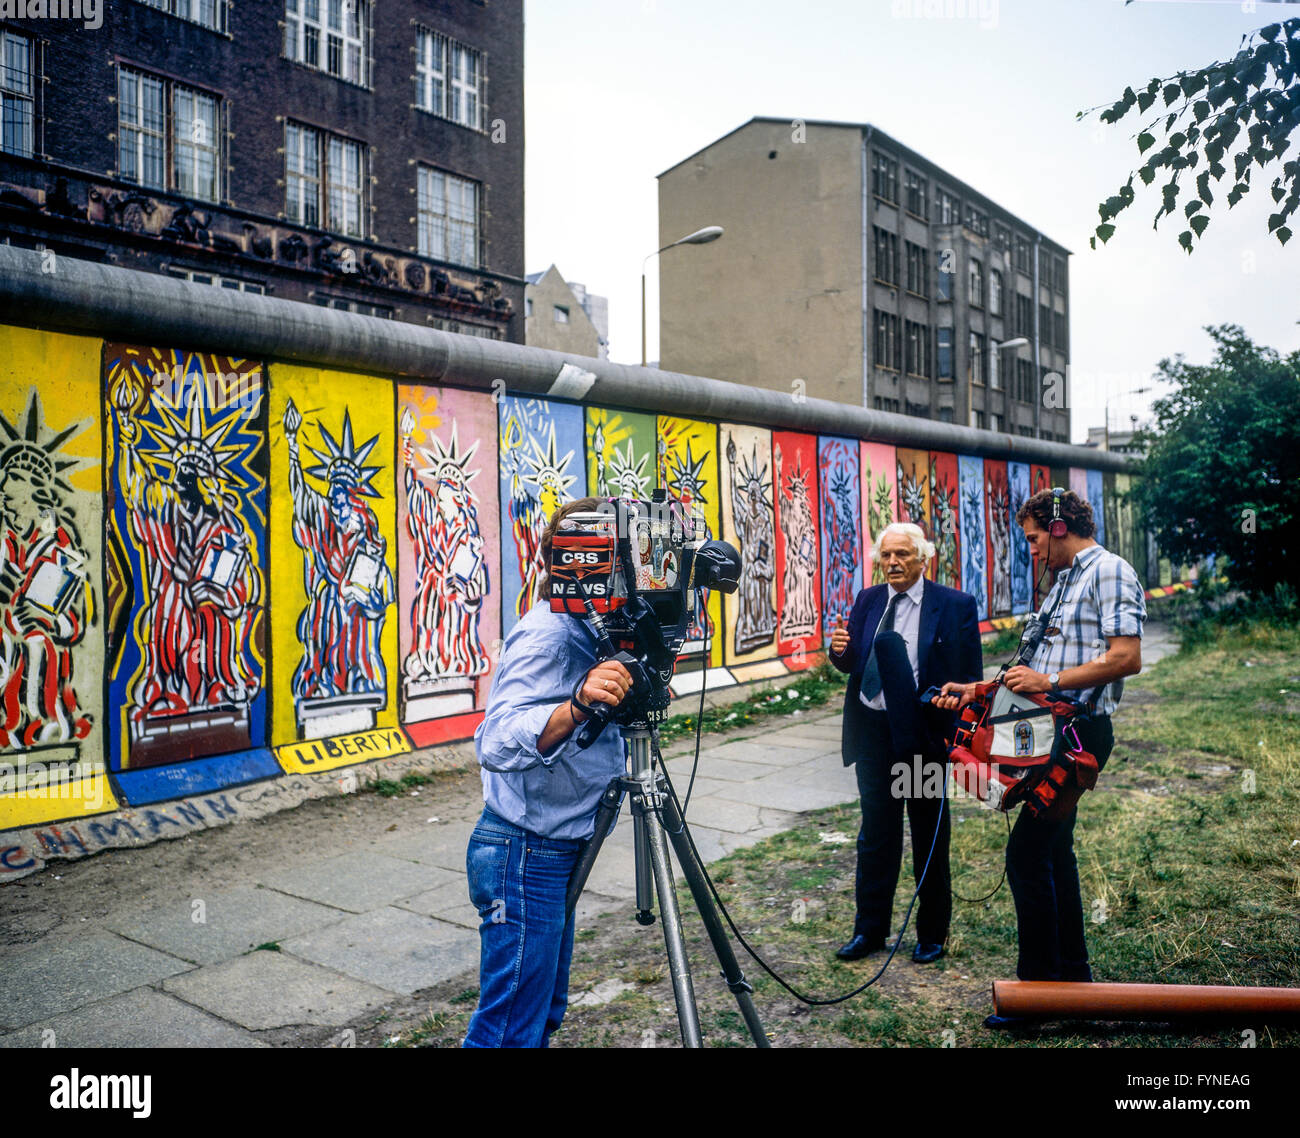 August 1986, CBS TV crew conducting an interview in front of Berlin Wall decorated with Statue of Liberty frescos, West Berlin side, Germany, Europe, Stock Photo